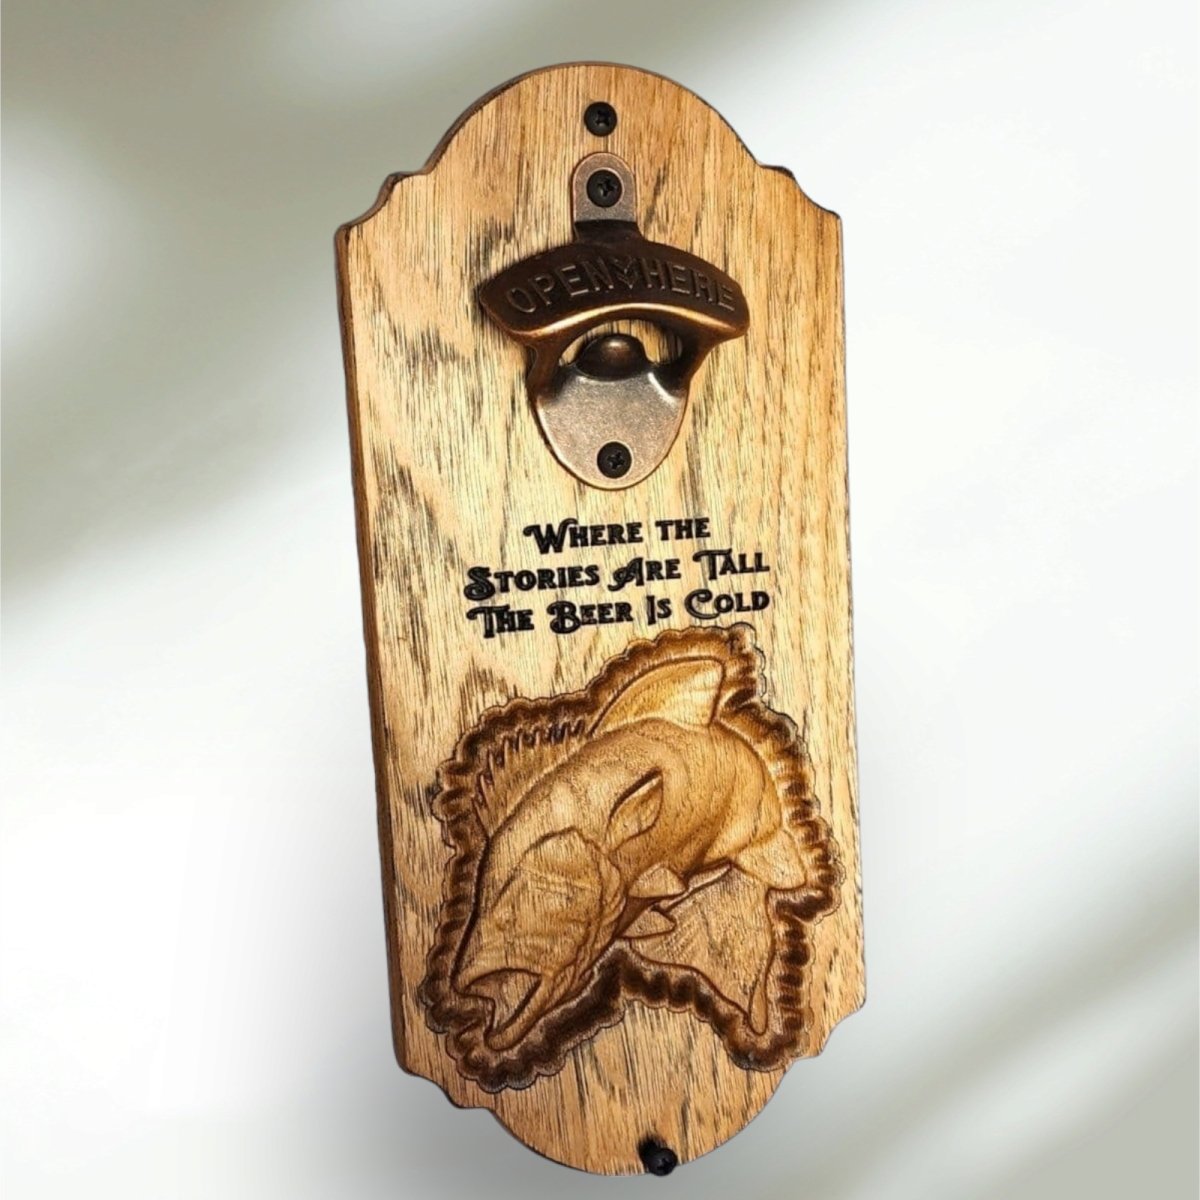 https://ohyeafabllc.com/cdn/shop/products/you-catchem-bottle-opener-wall-mount-with-engraving-and-wood-carvingcocktail-barware-tool-sets-707408.jpg?v=1702918028&width=1445